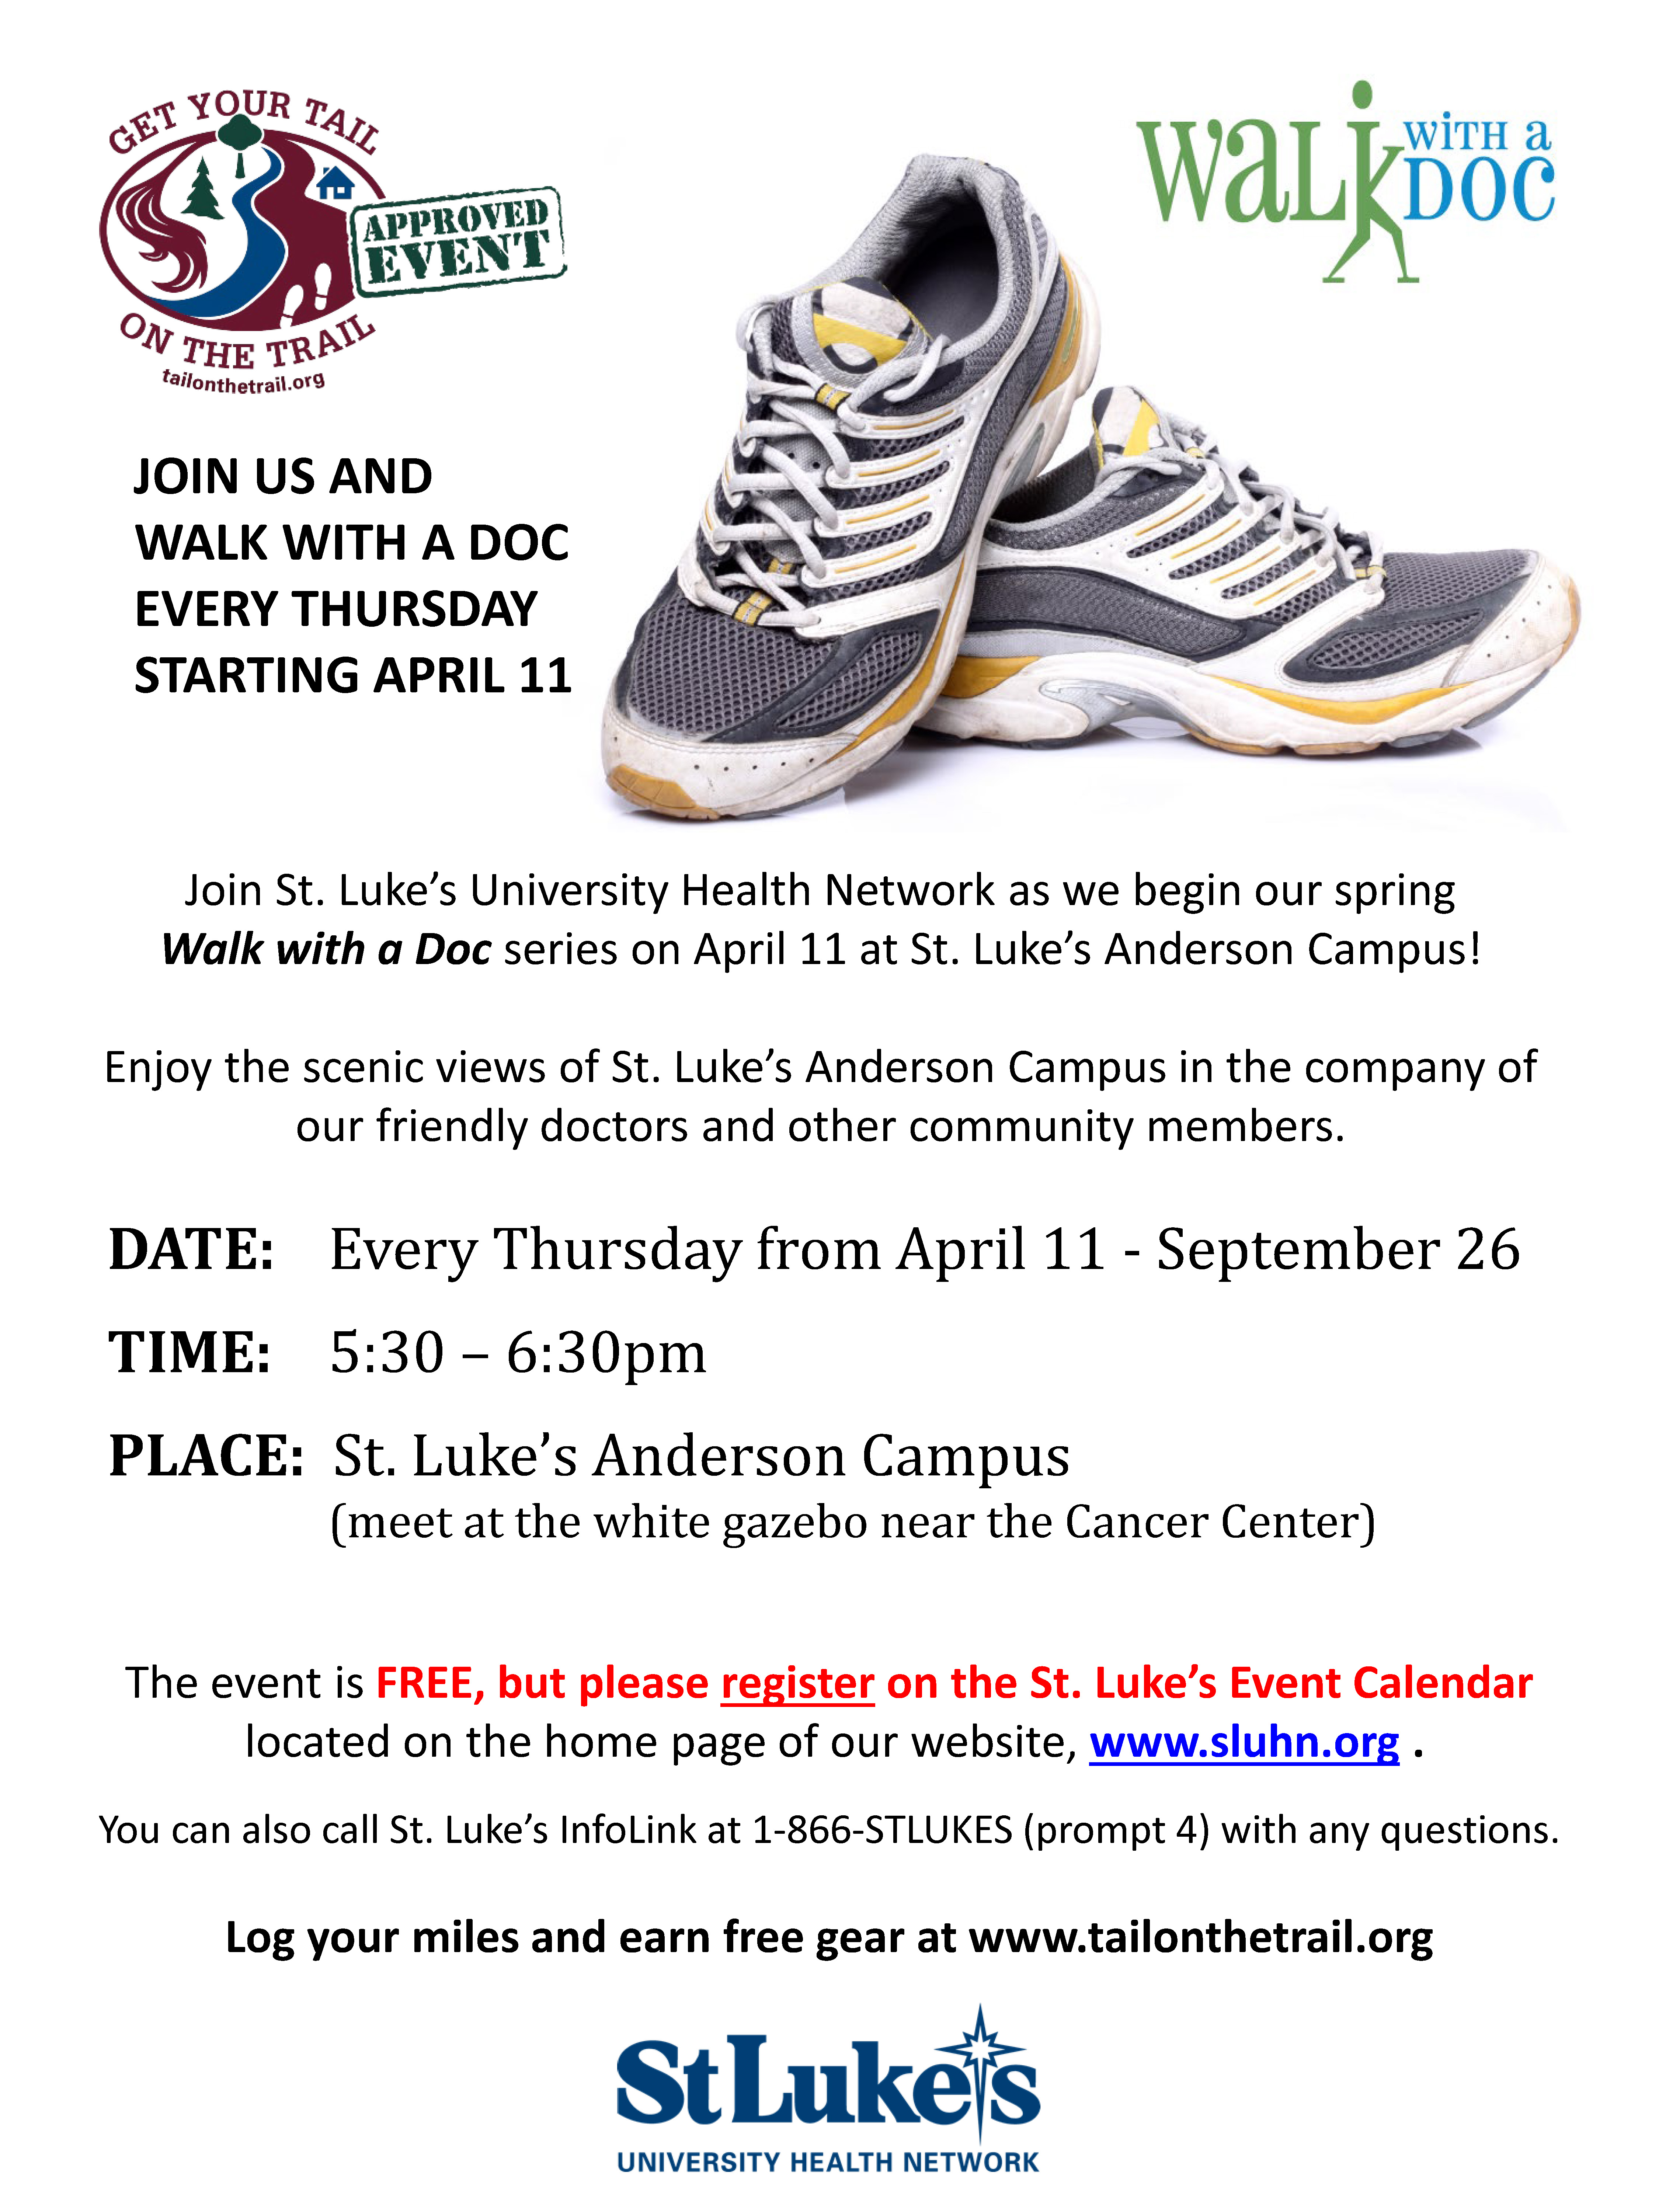 Walk with a Doc at the St. Luke’s Anderson Campus